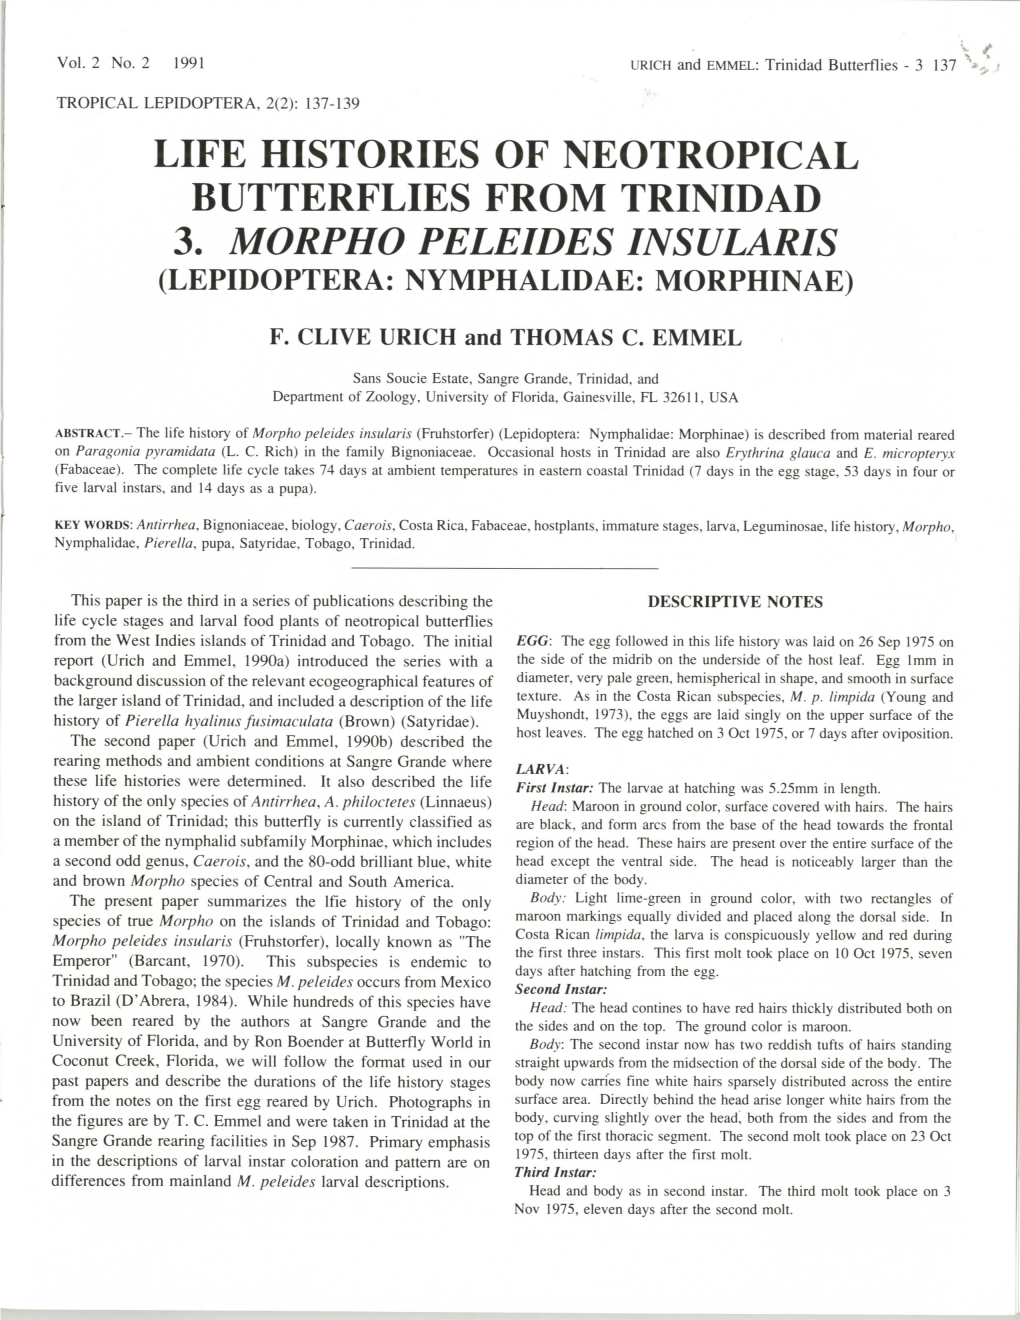 Life Histories of Neotropical Butterflies from Trinidad 3. Morpho Peleides Insularis (Lepidoptera: Nymphalidae: Morphinae)